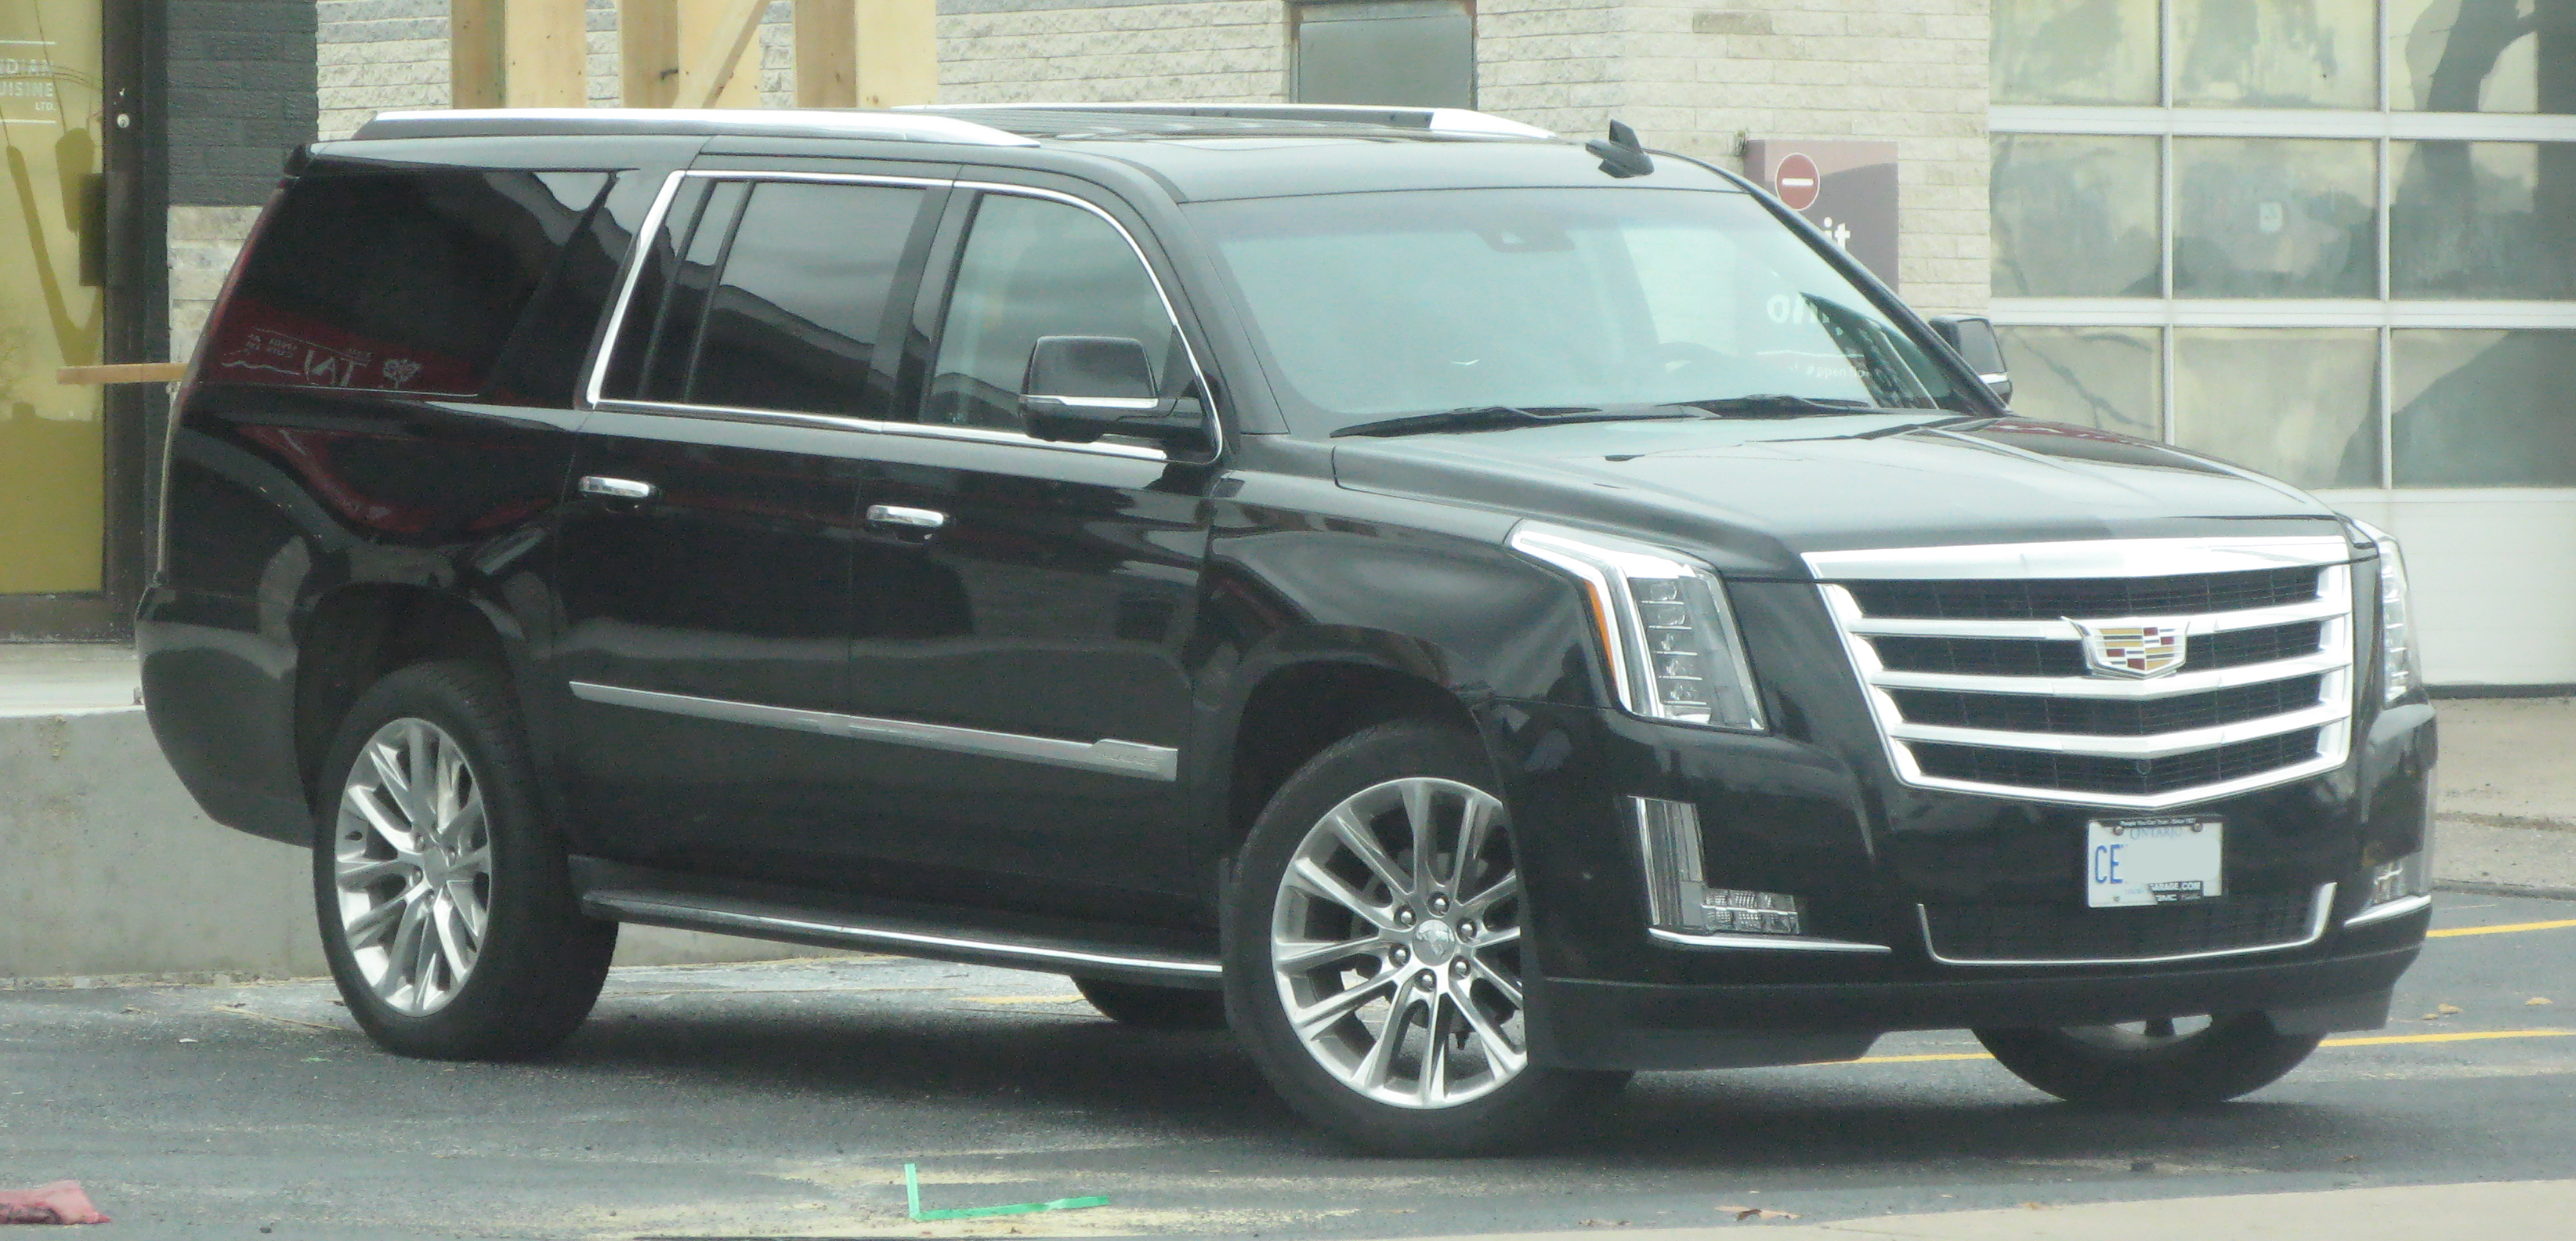 File:2018 Cadillac Escalade ESV Luxury, Front Right, 10-27-2020.jpg -  Wikimedia Commons